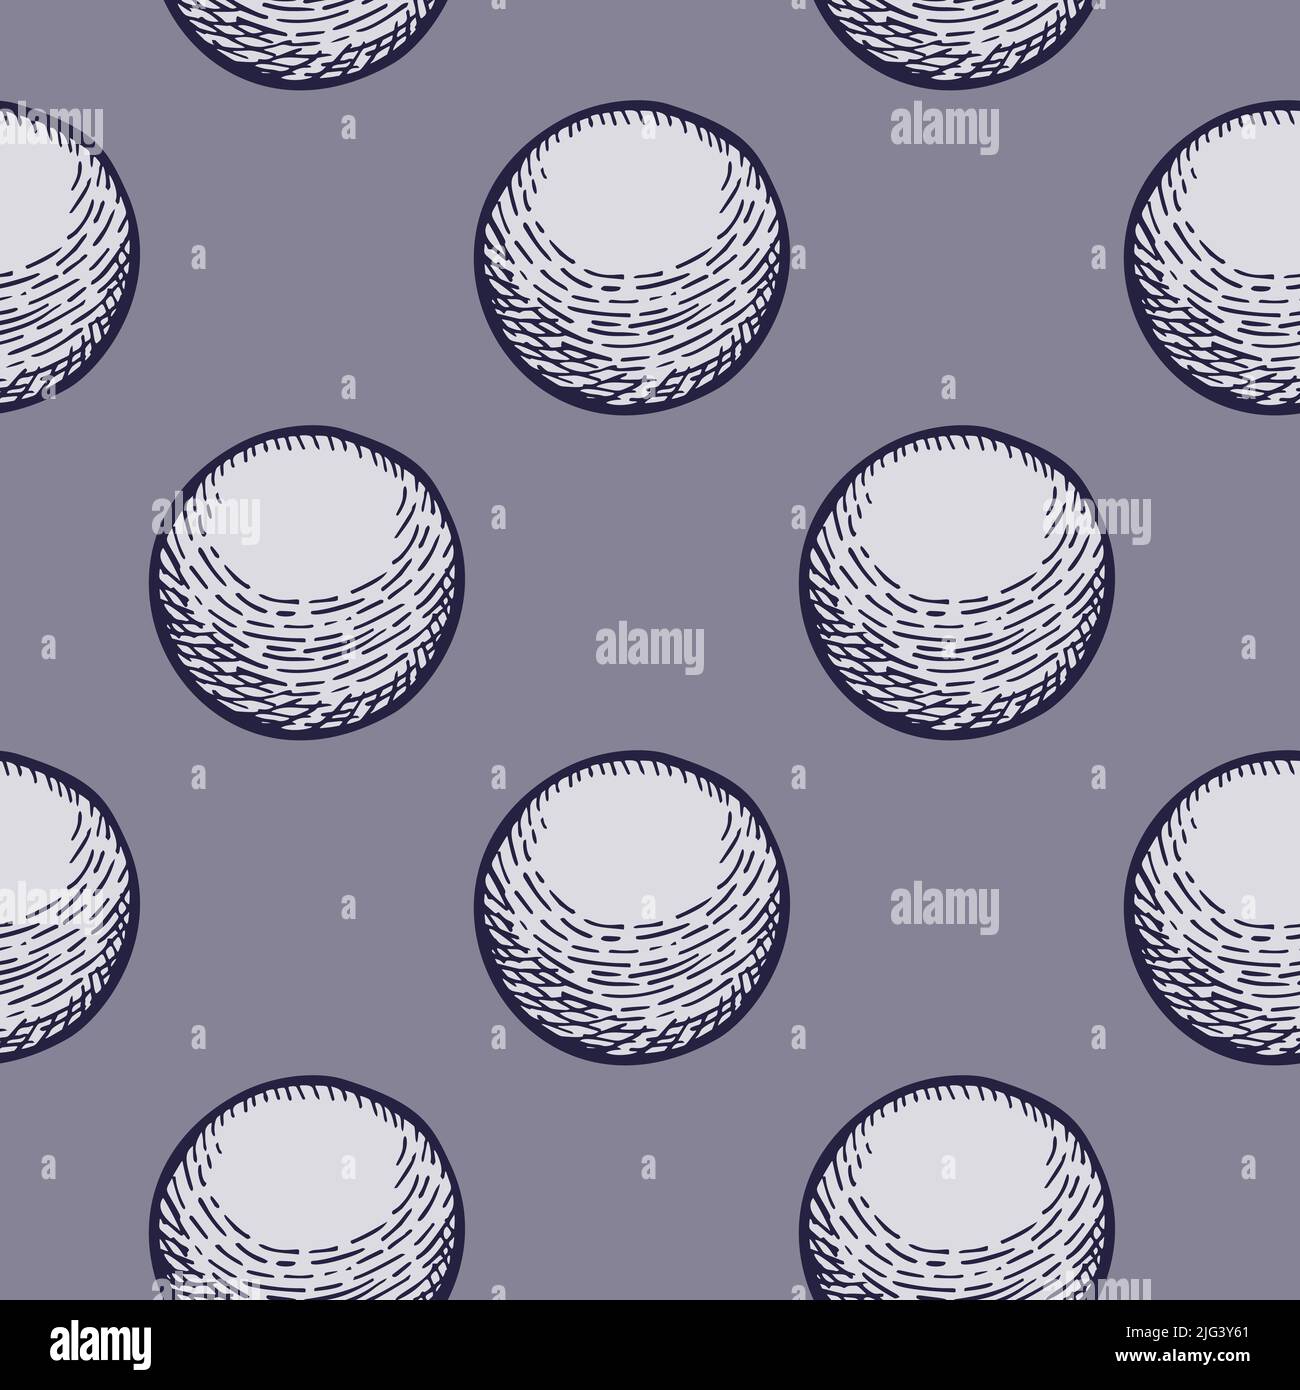 Ball engraved seamless pattern. Vintage sports elements for table tennis hand drawn style. Sketch texture for fabric, wallpaper, textile, print, title Stock Vector